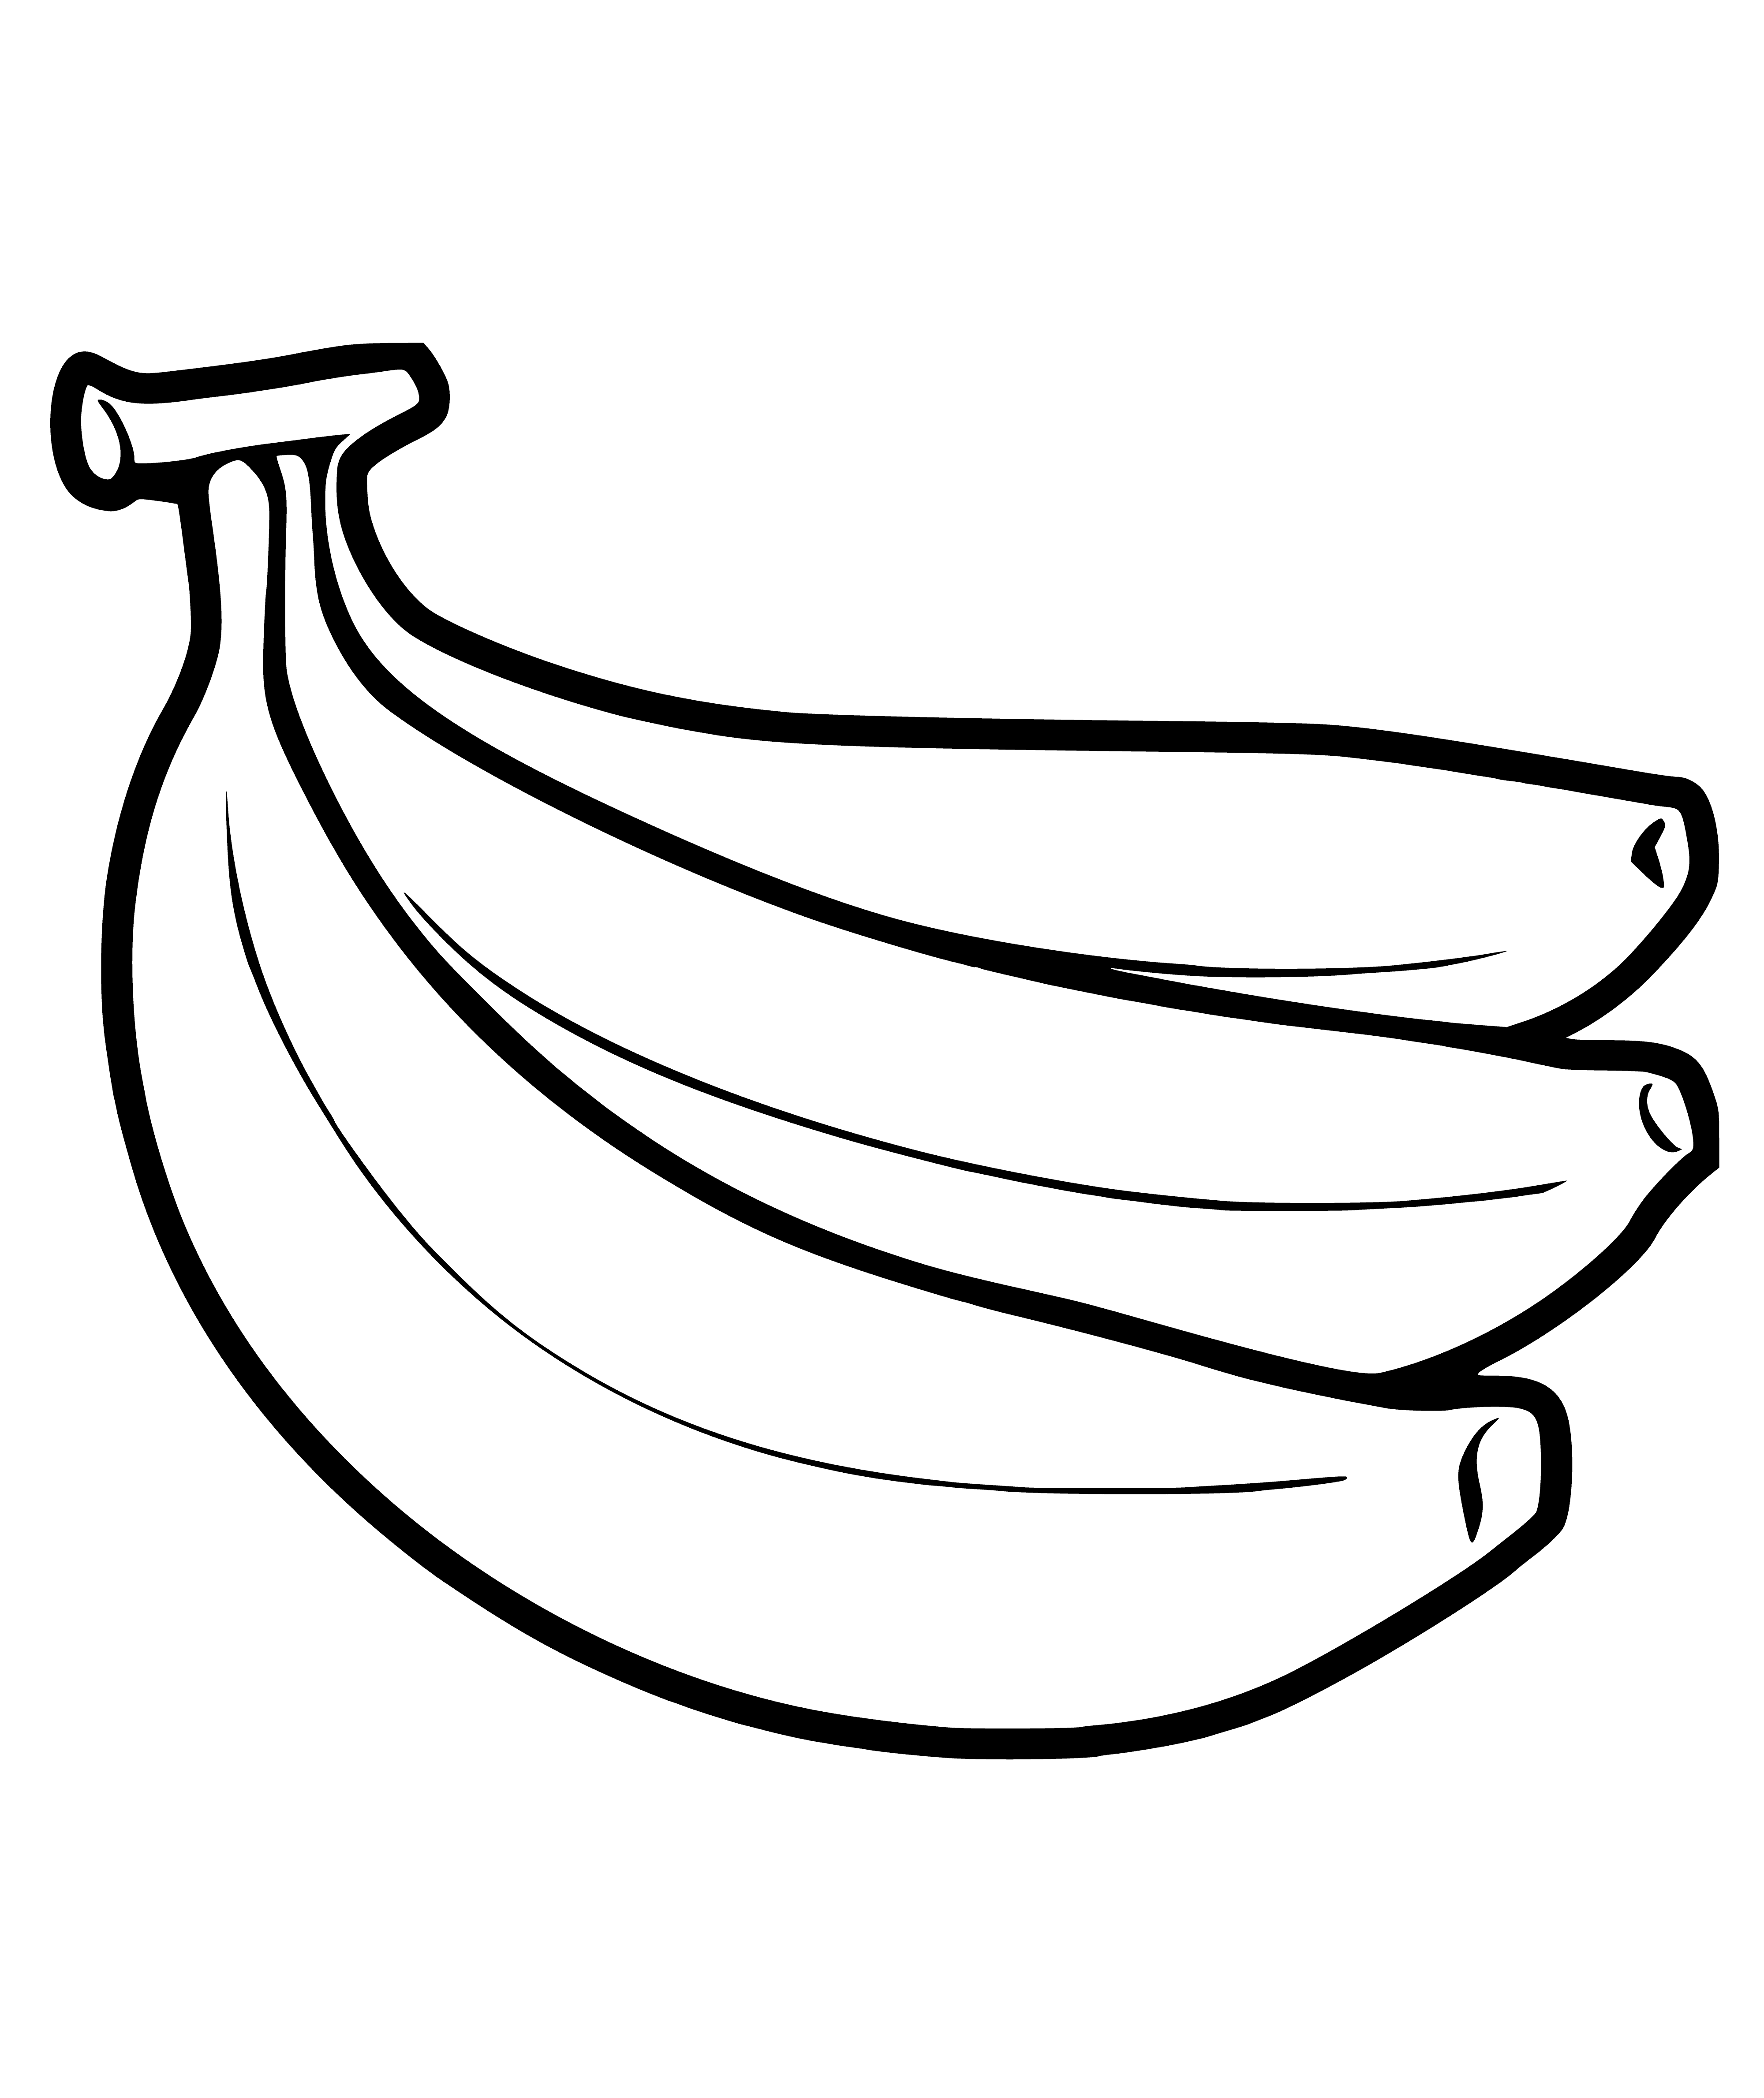 coloring page: 3 curved yellow bananas w/ pointy ends & brown spots on skin in coloring page.